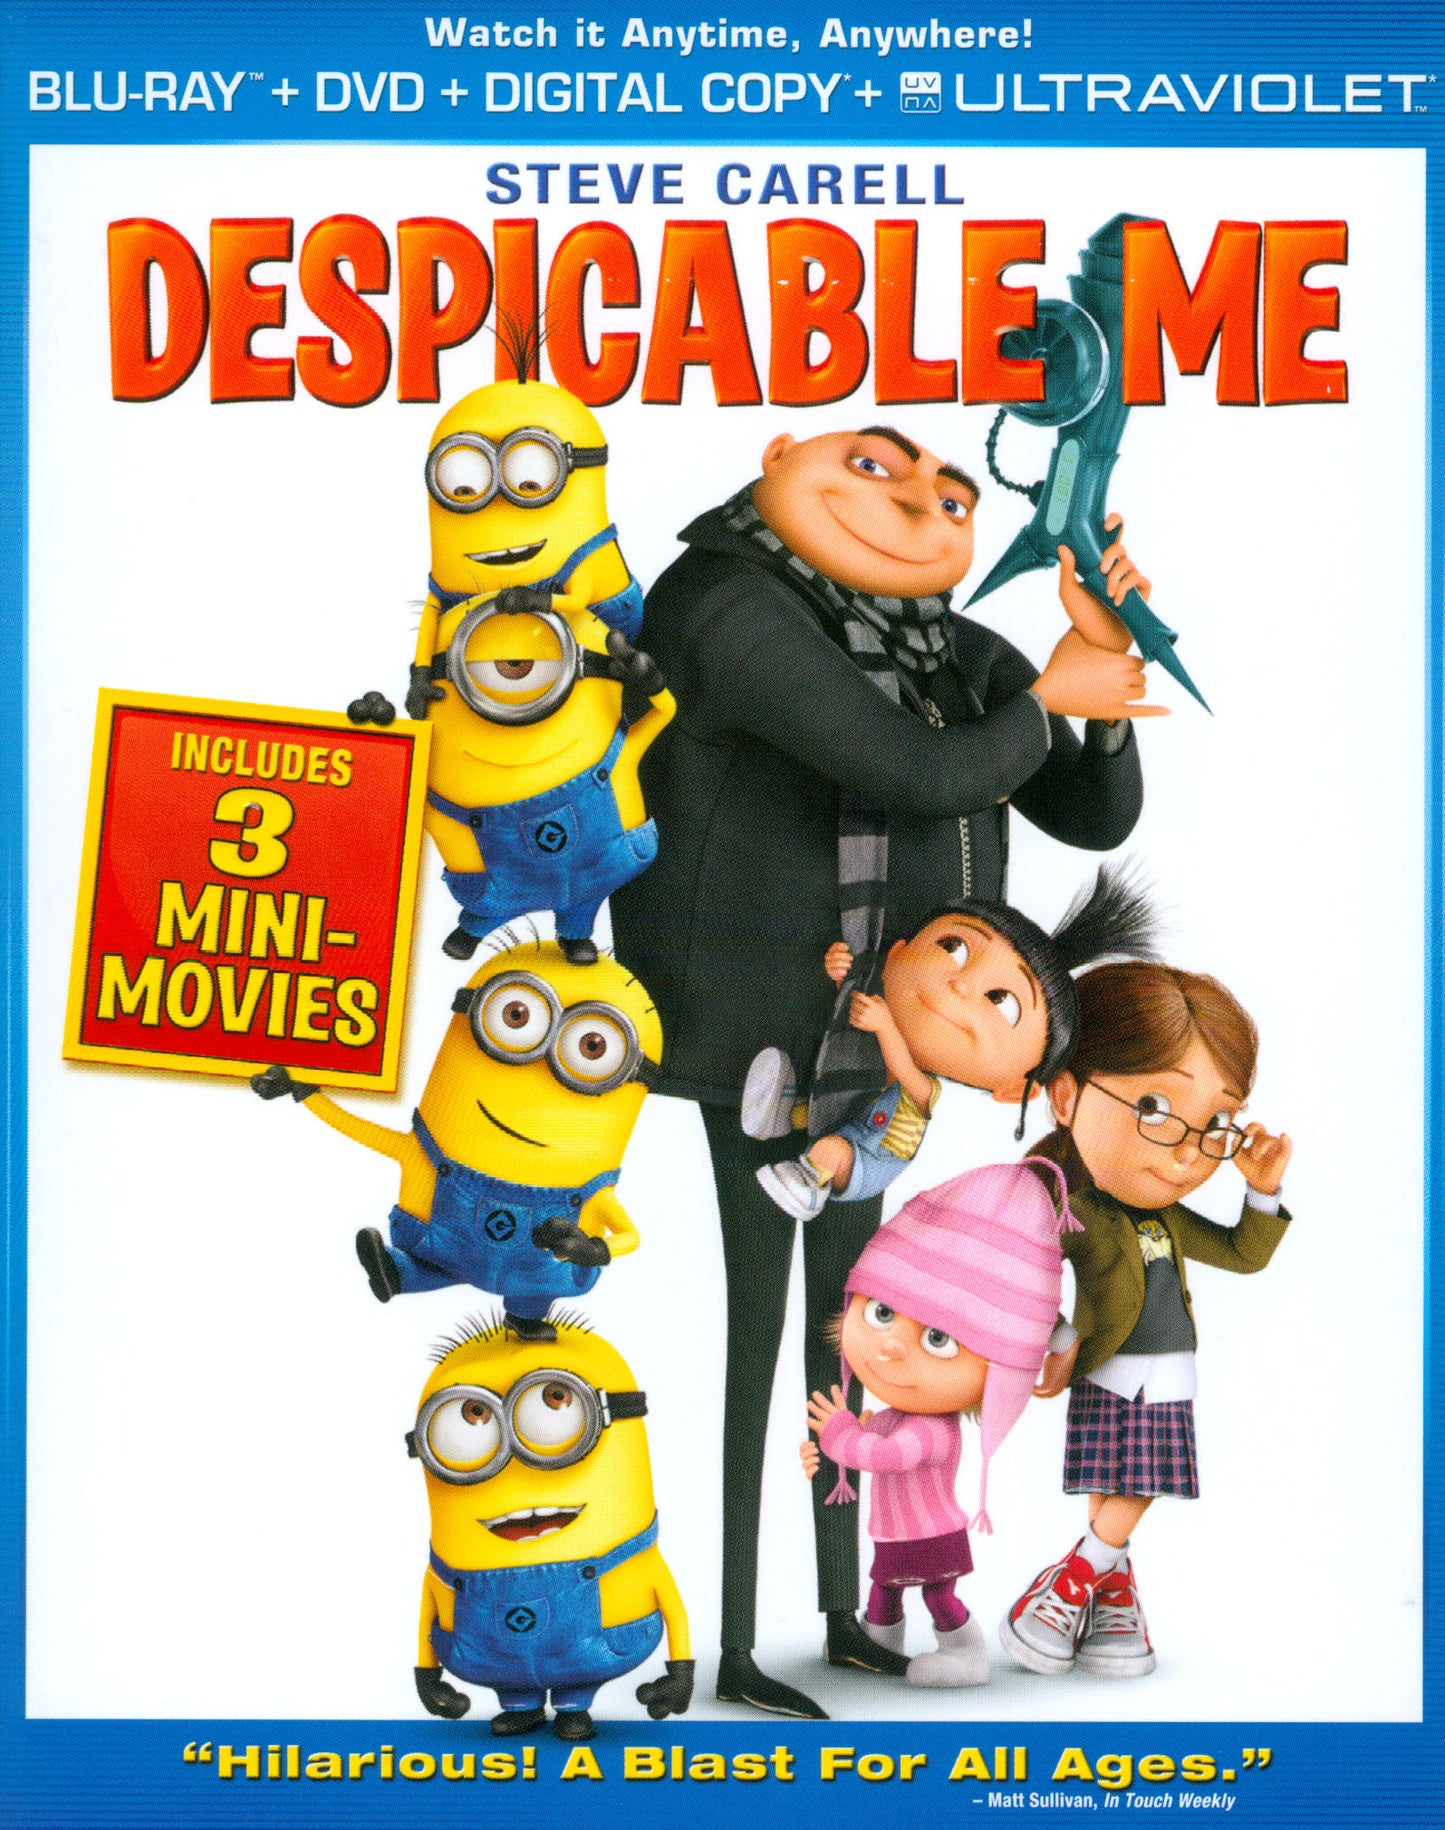 Despicable Me [2 Discs] [Includes Digital Copy] [Blu-ray/DVD] cover art